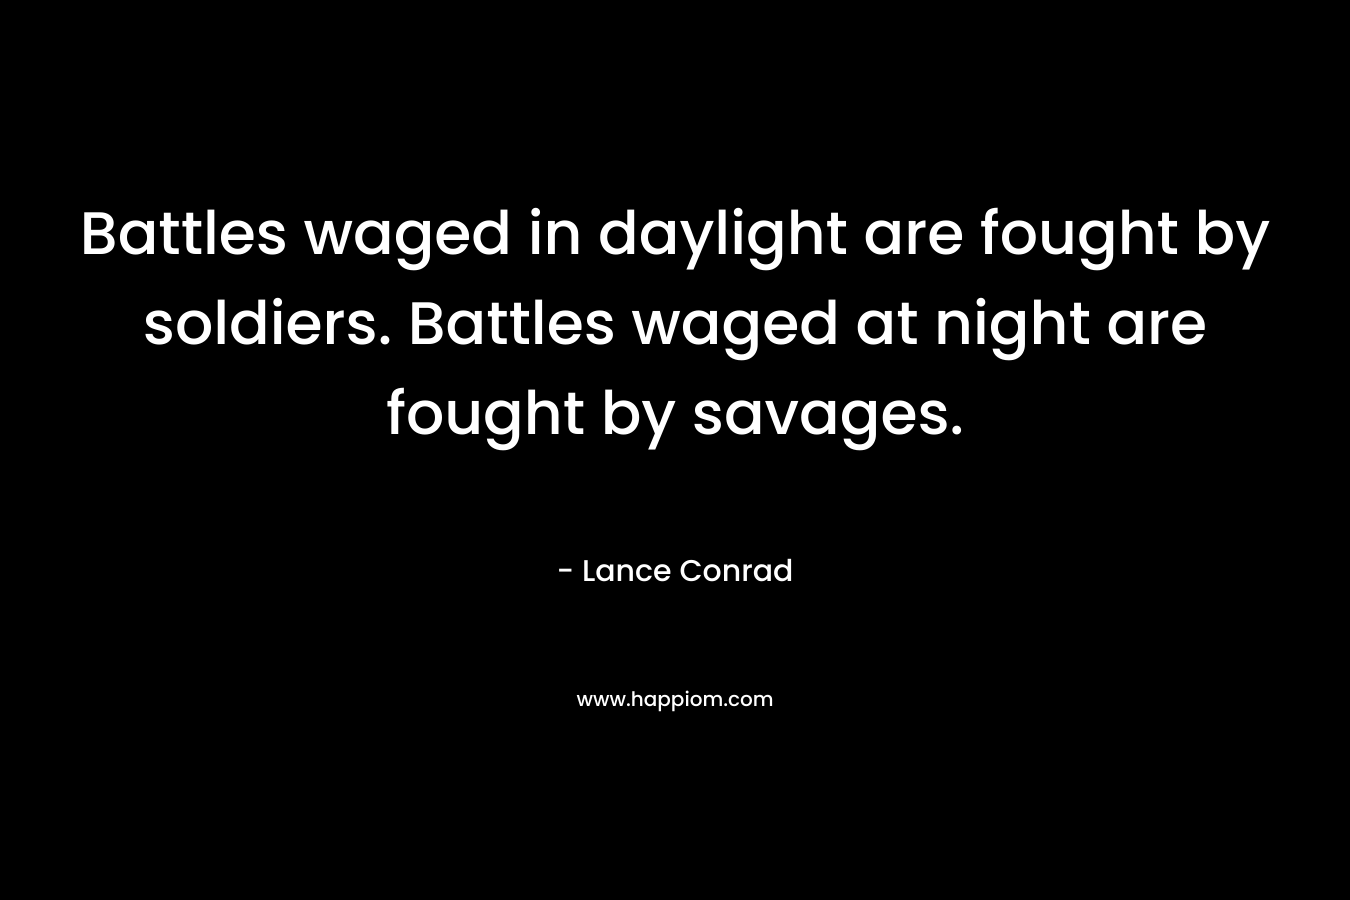 Battles waged in daylight are fought by soldiers. Battles waged at night are fought by savages. – Lance Conrad